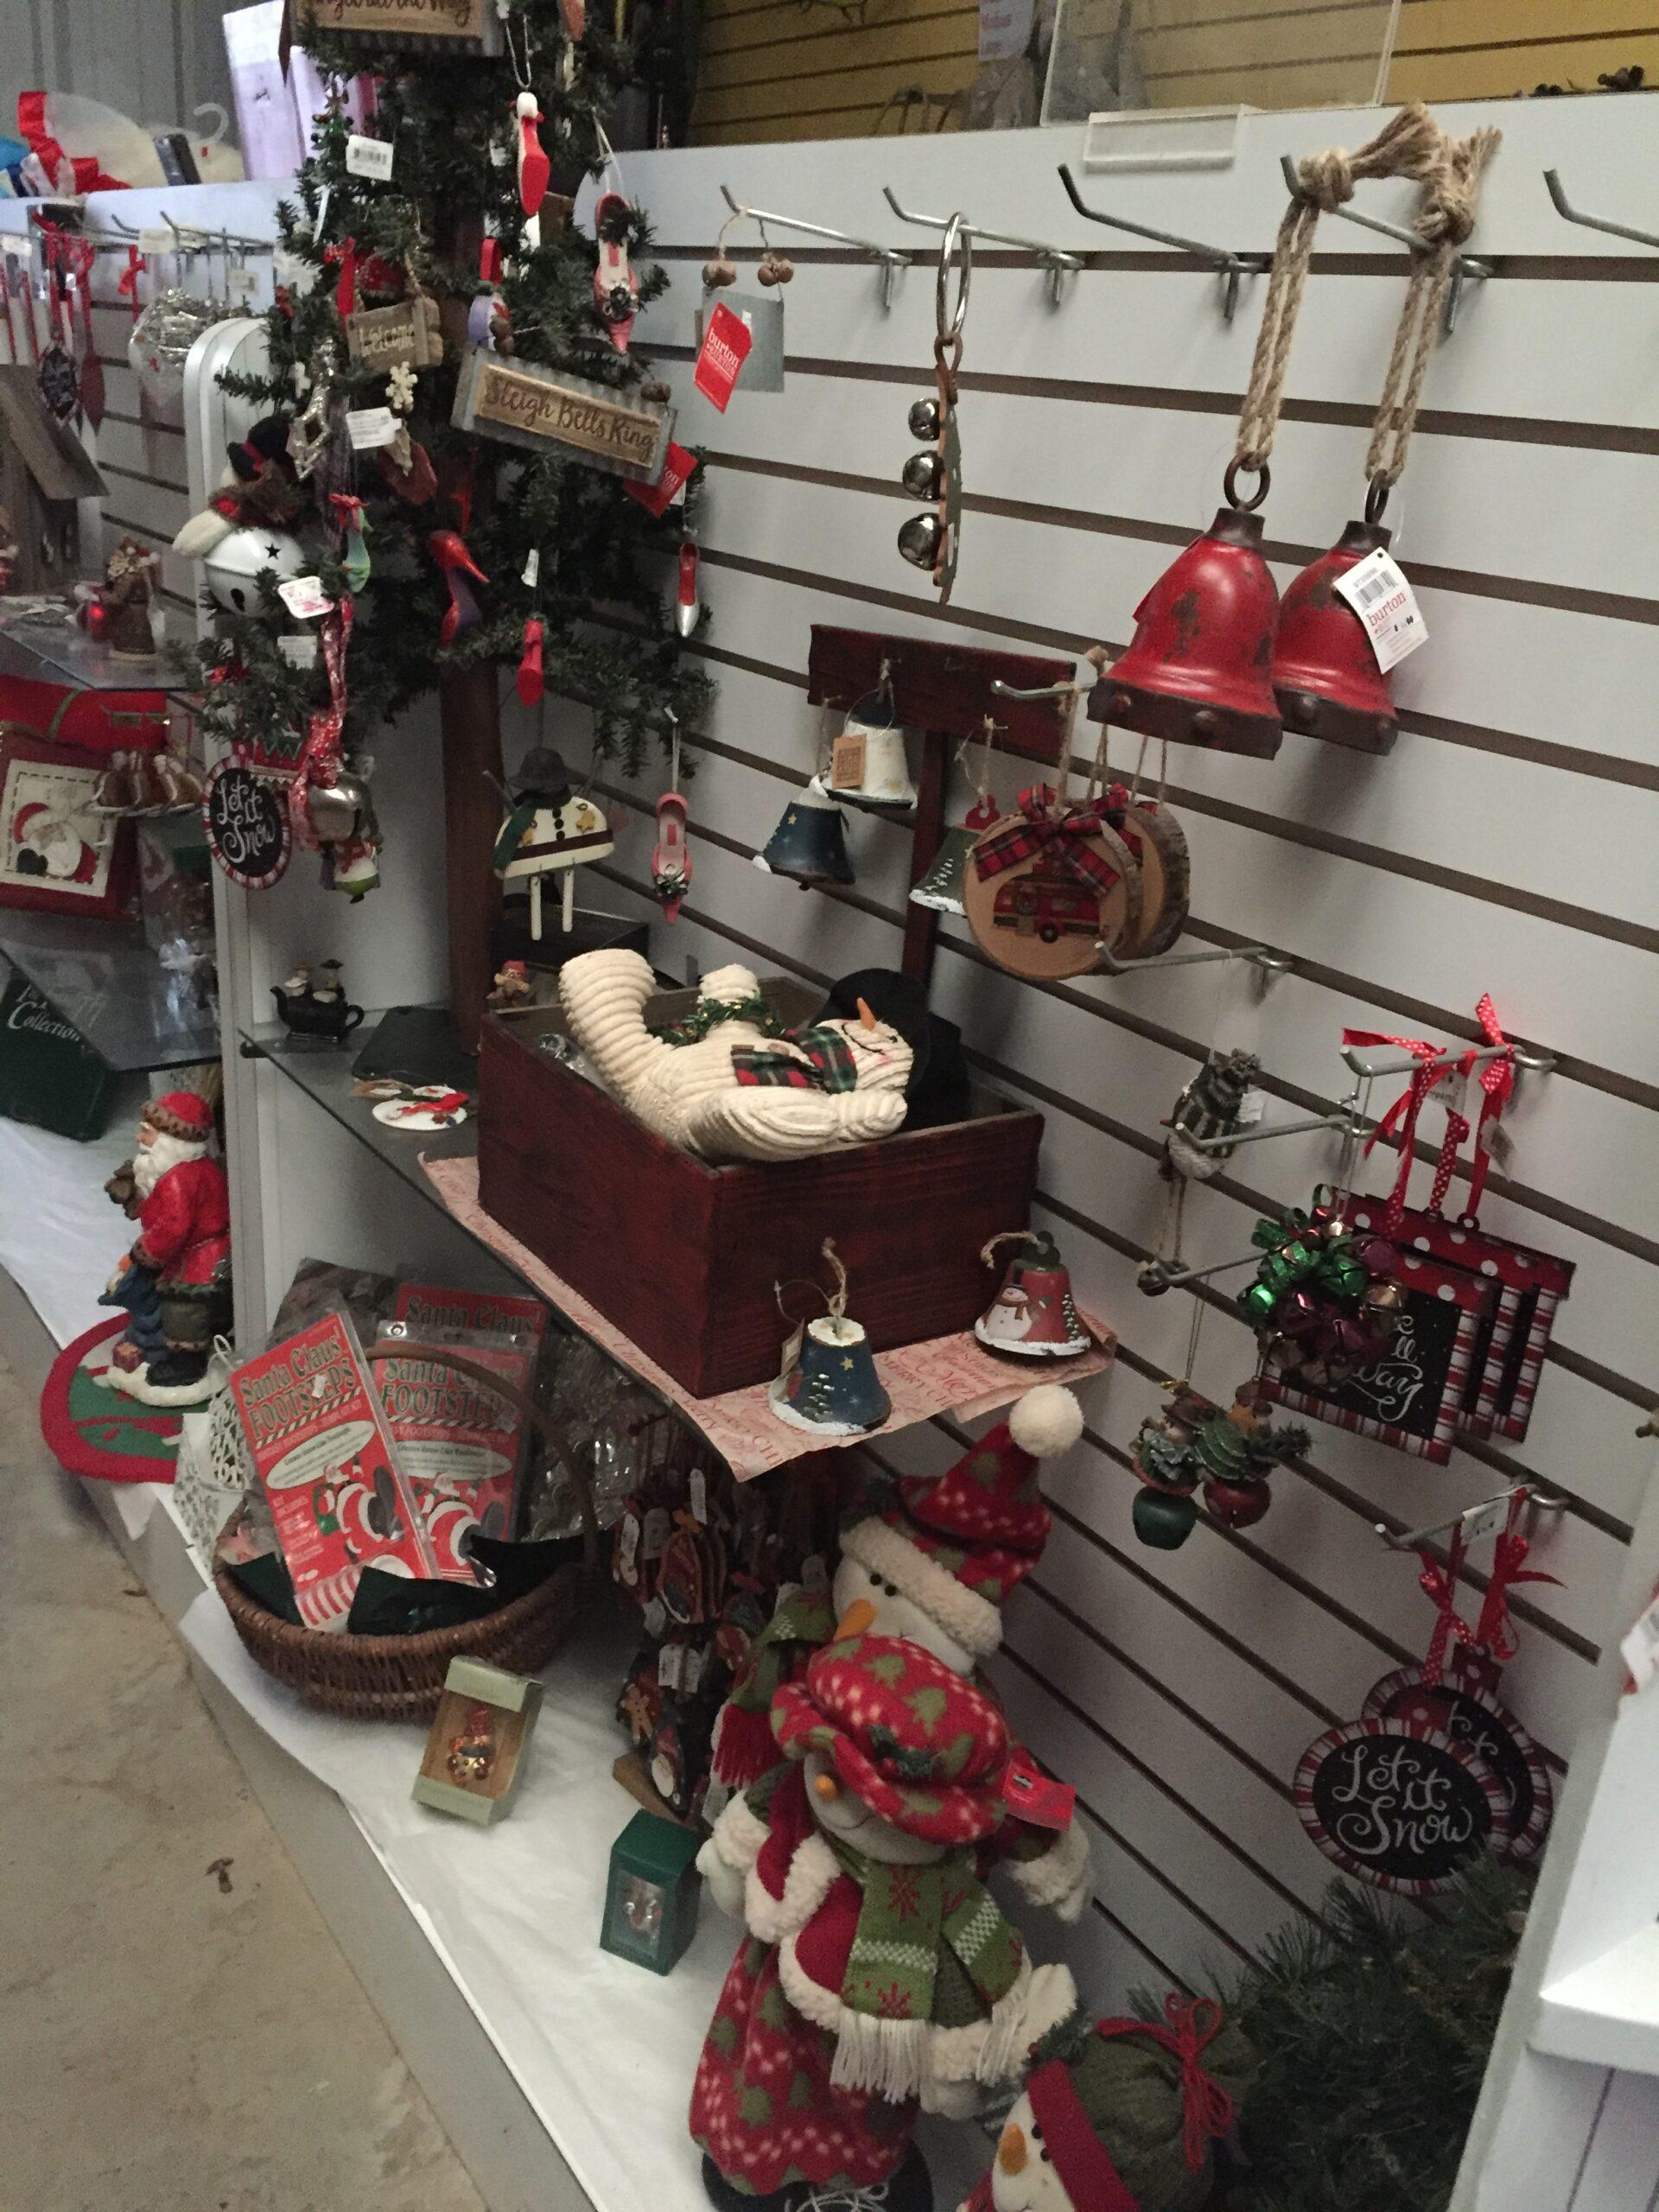 Row of available ornaments, bells, and other Christmas decorations on shelving at Haynie's Green Acres Christmas Tree farm.